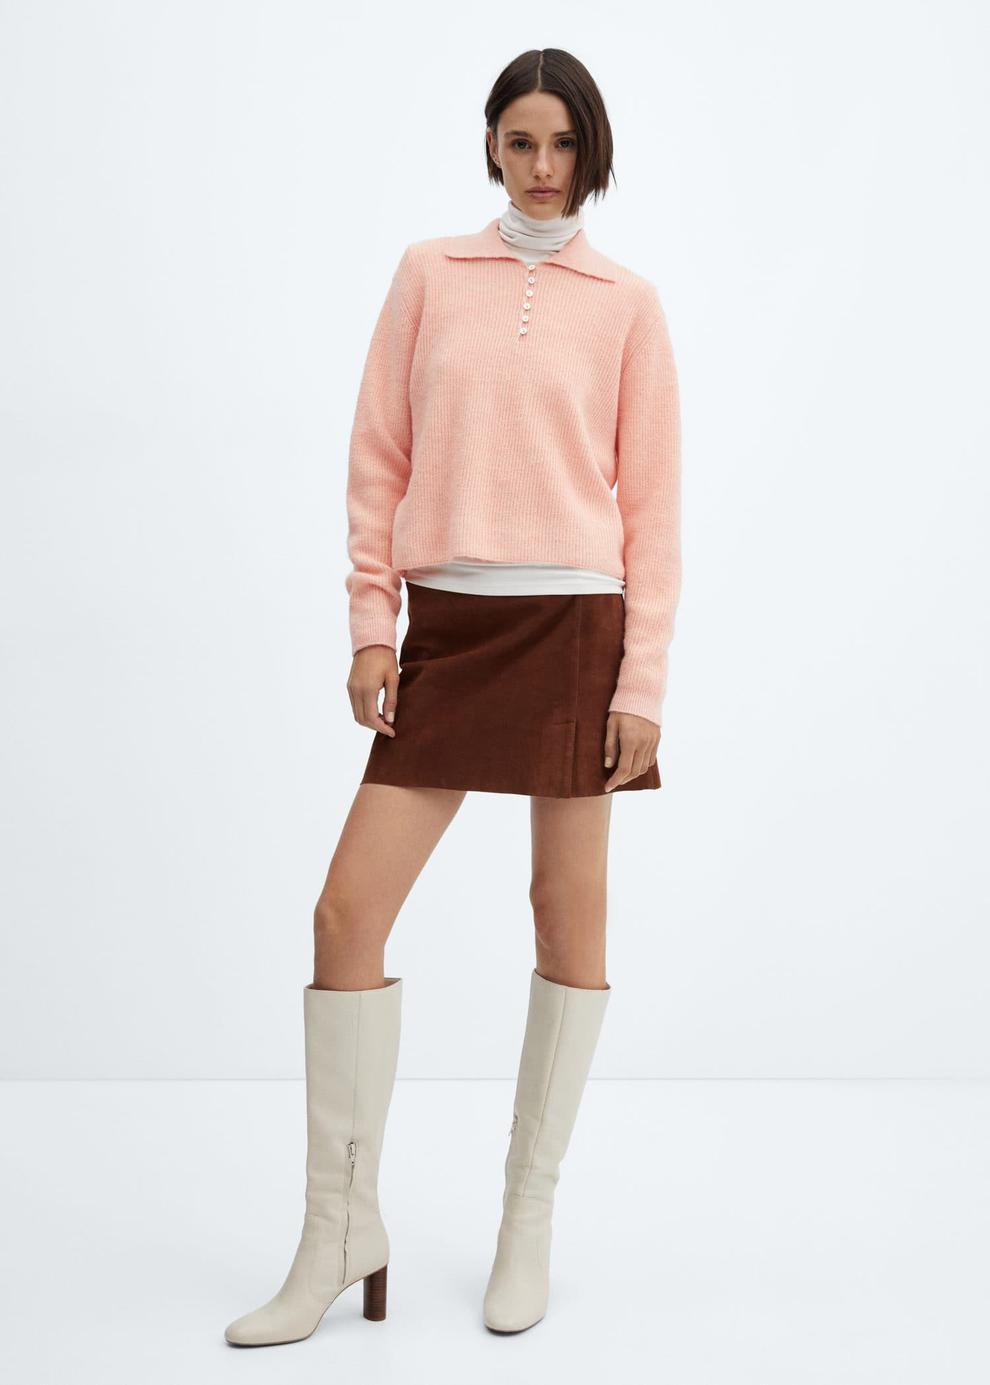 Knitted polo neck sweater offers at £17.99 in MANGO